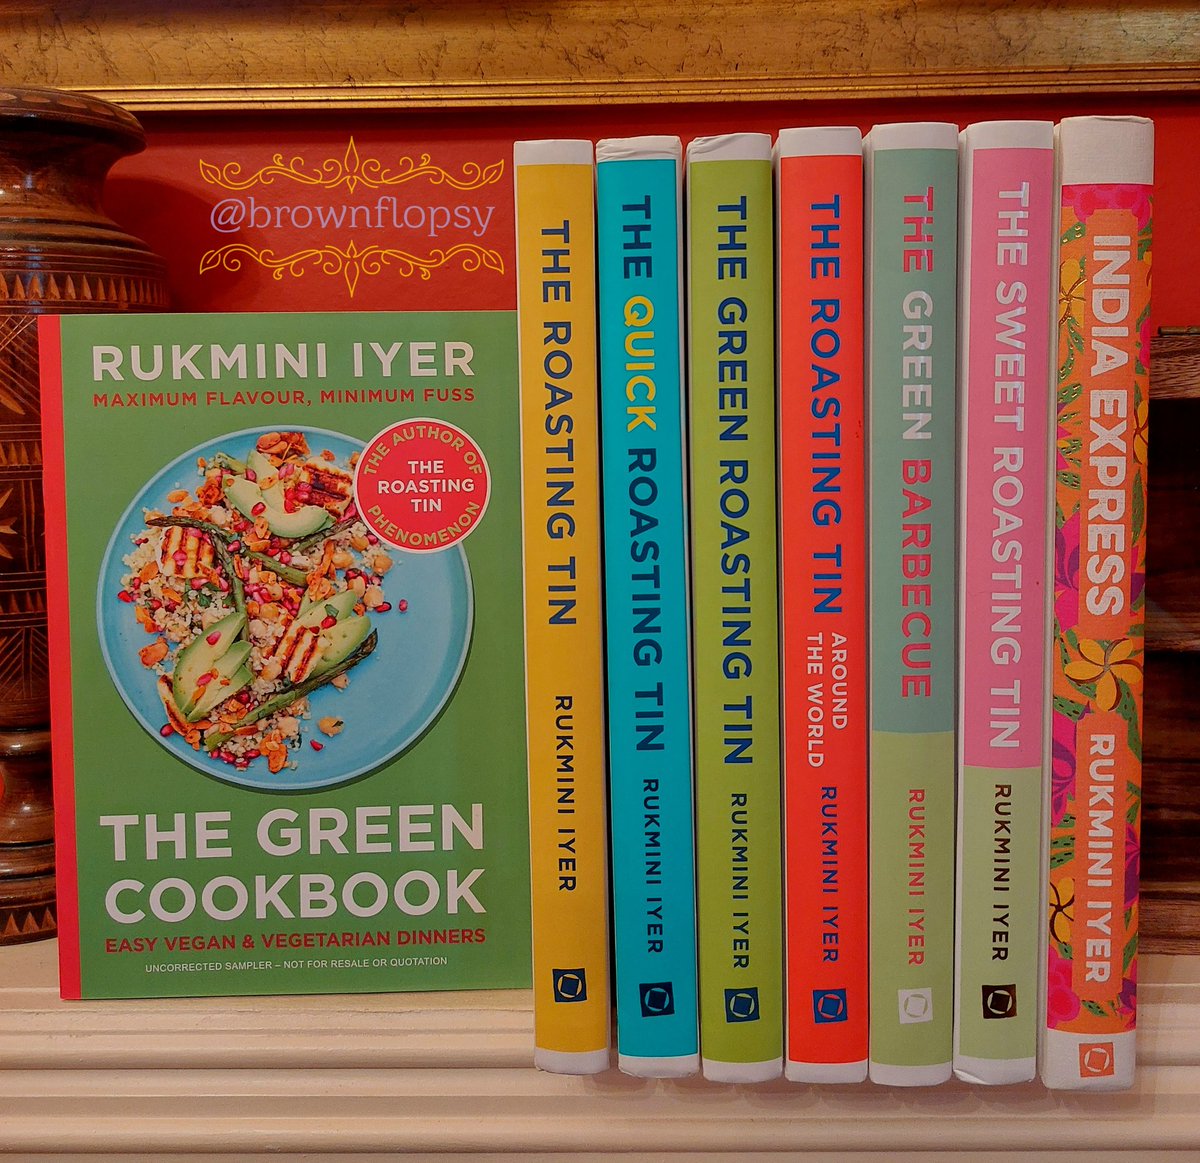 Thank you @vintagebooks for this sampler of #TheGreenCookbook - the brand new cookbook from the brilliant @missminifer 💚

Coming  6th June from @SquarePegBooks 

As you can see, I am a fully paid up member of the #TinLads club, and I can't wait to try the tasty new dishes! 😋